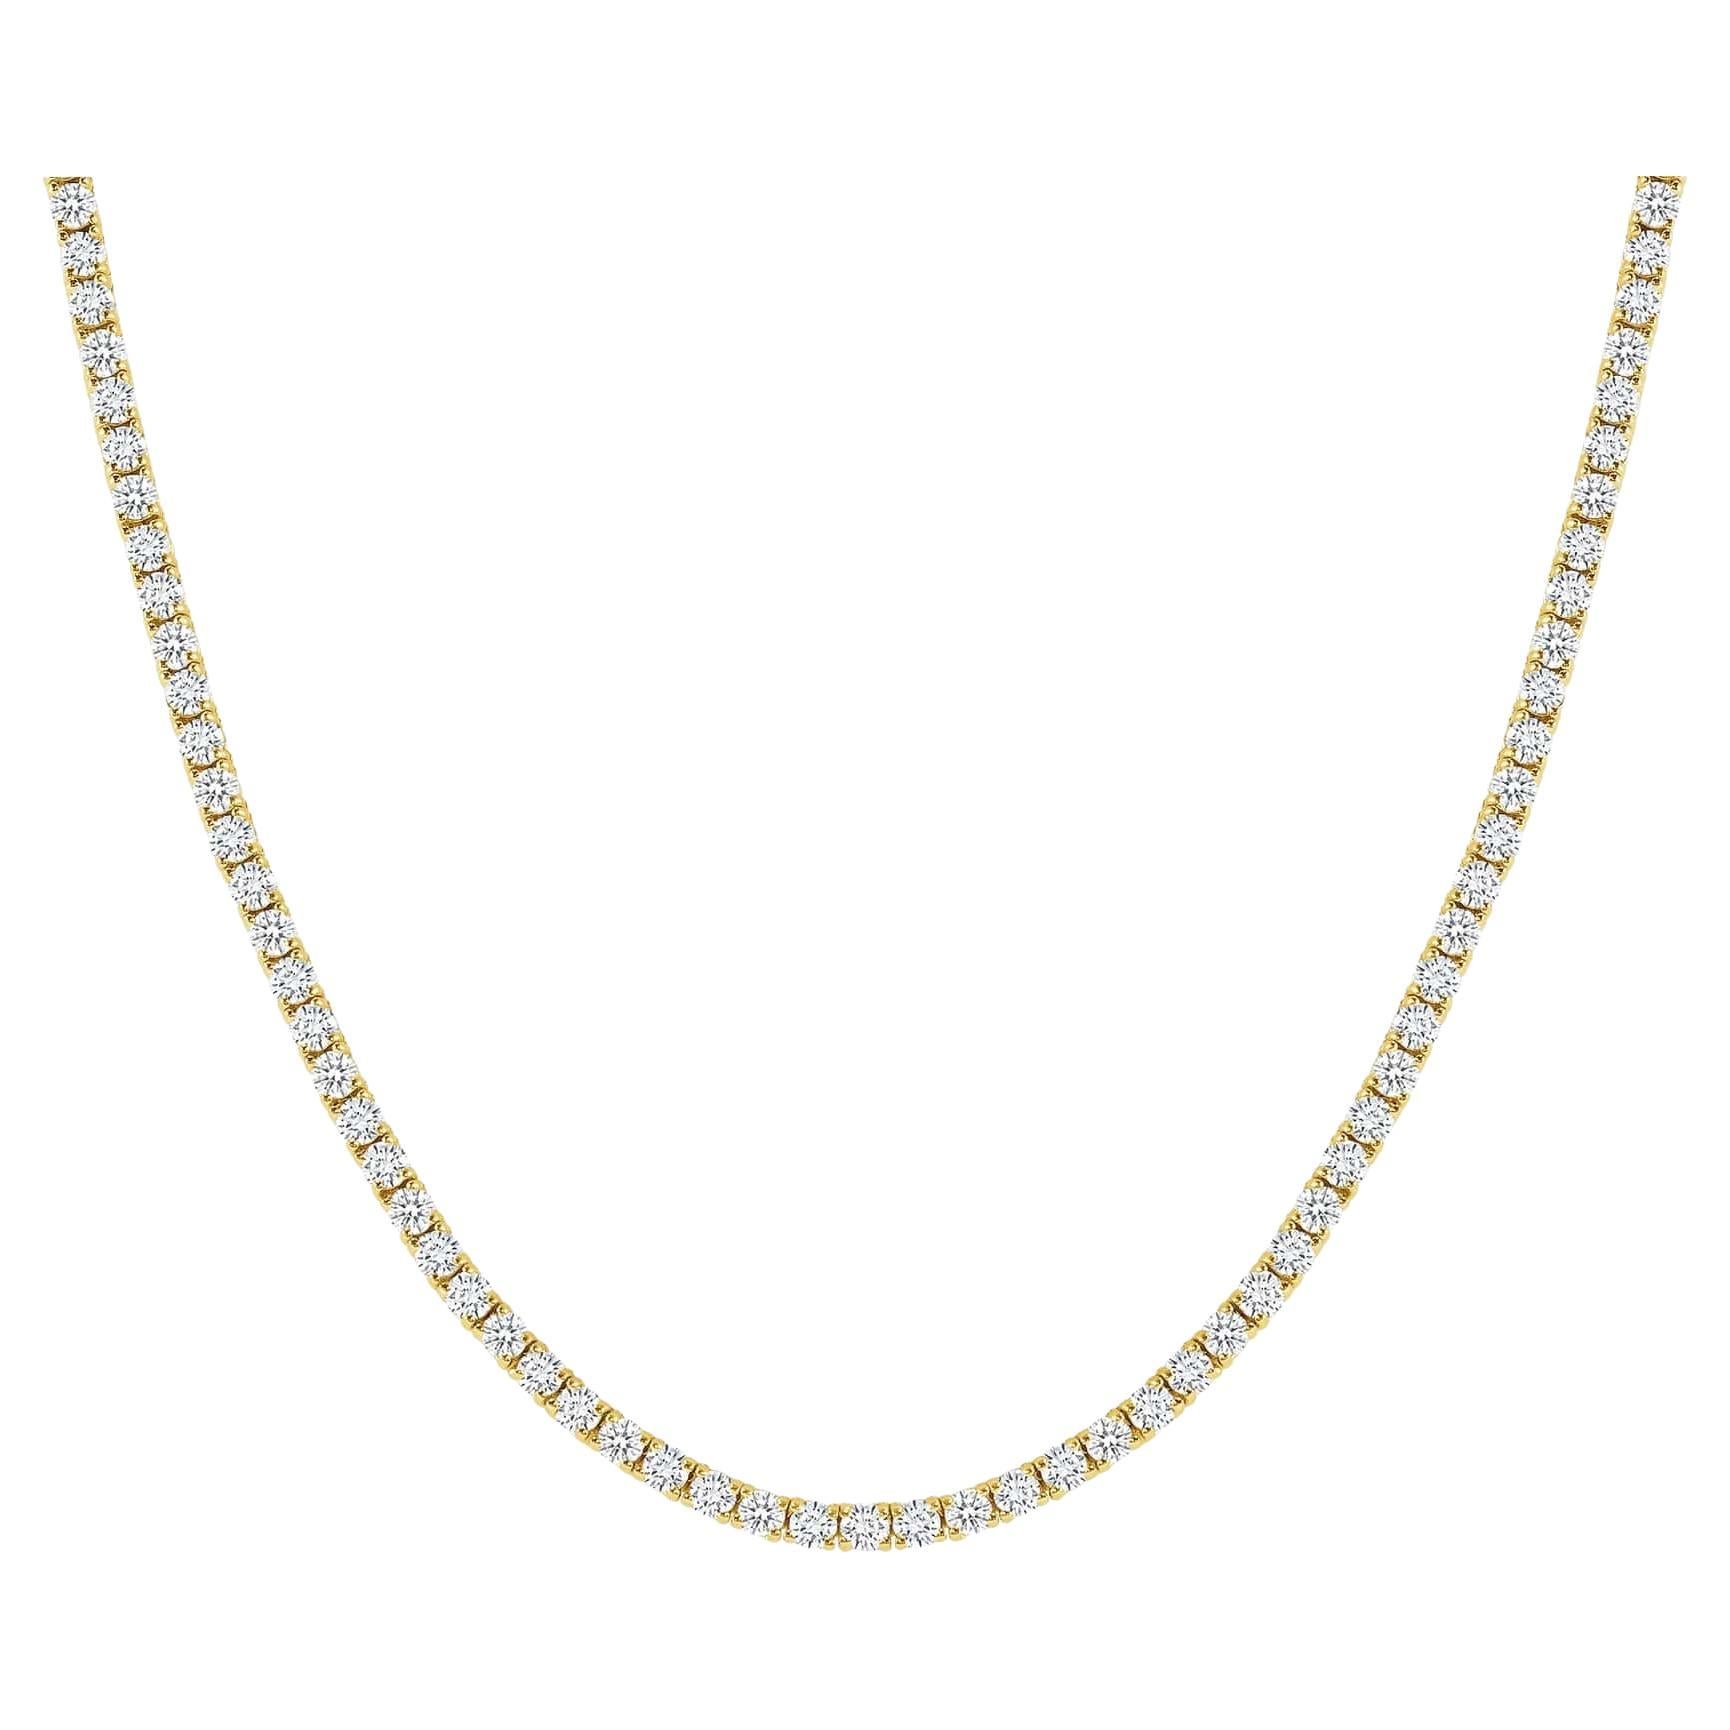 Diamond Tennis Necklace - 4 Prong Setting For Sale